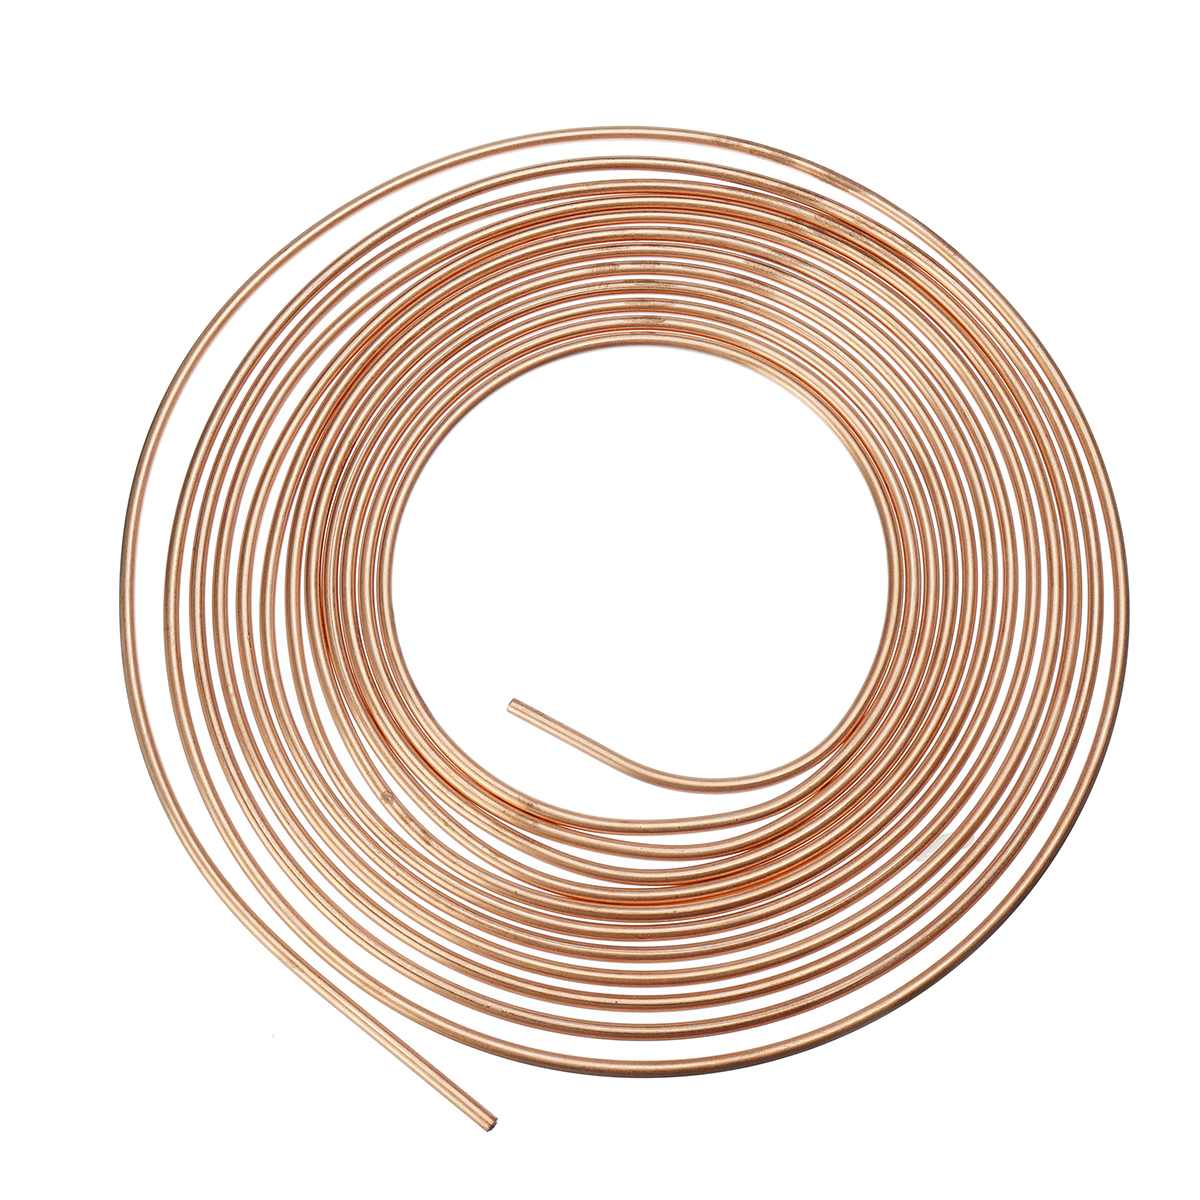 25ft 7.62m Roll Tube Coil of 3/16 OD Copper Nickel Brake Pipe Hose Line Piping Tube Anti-rust